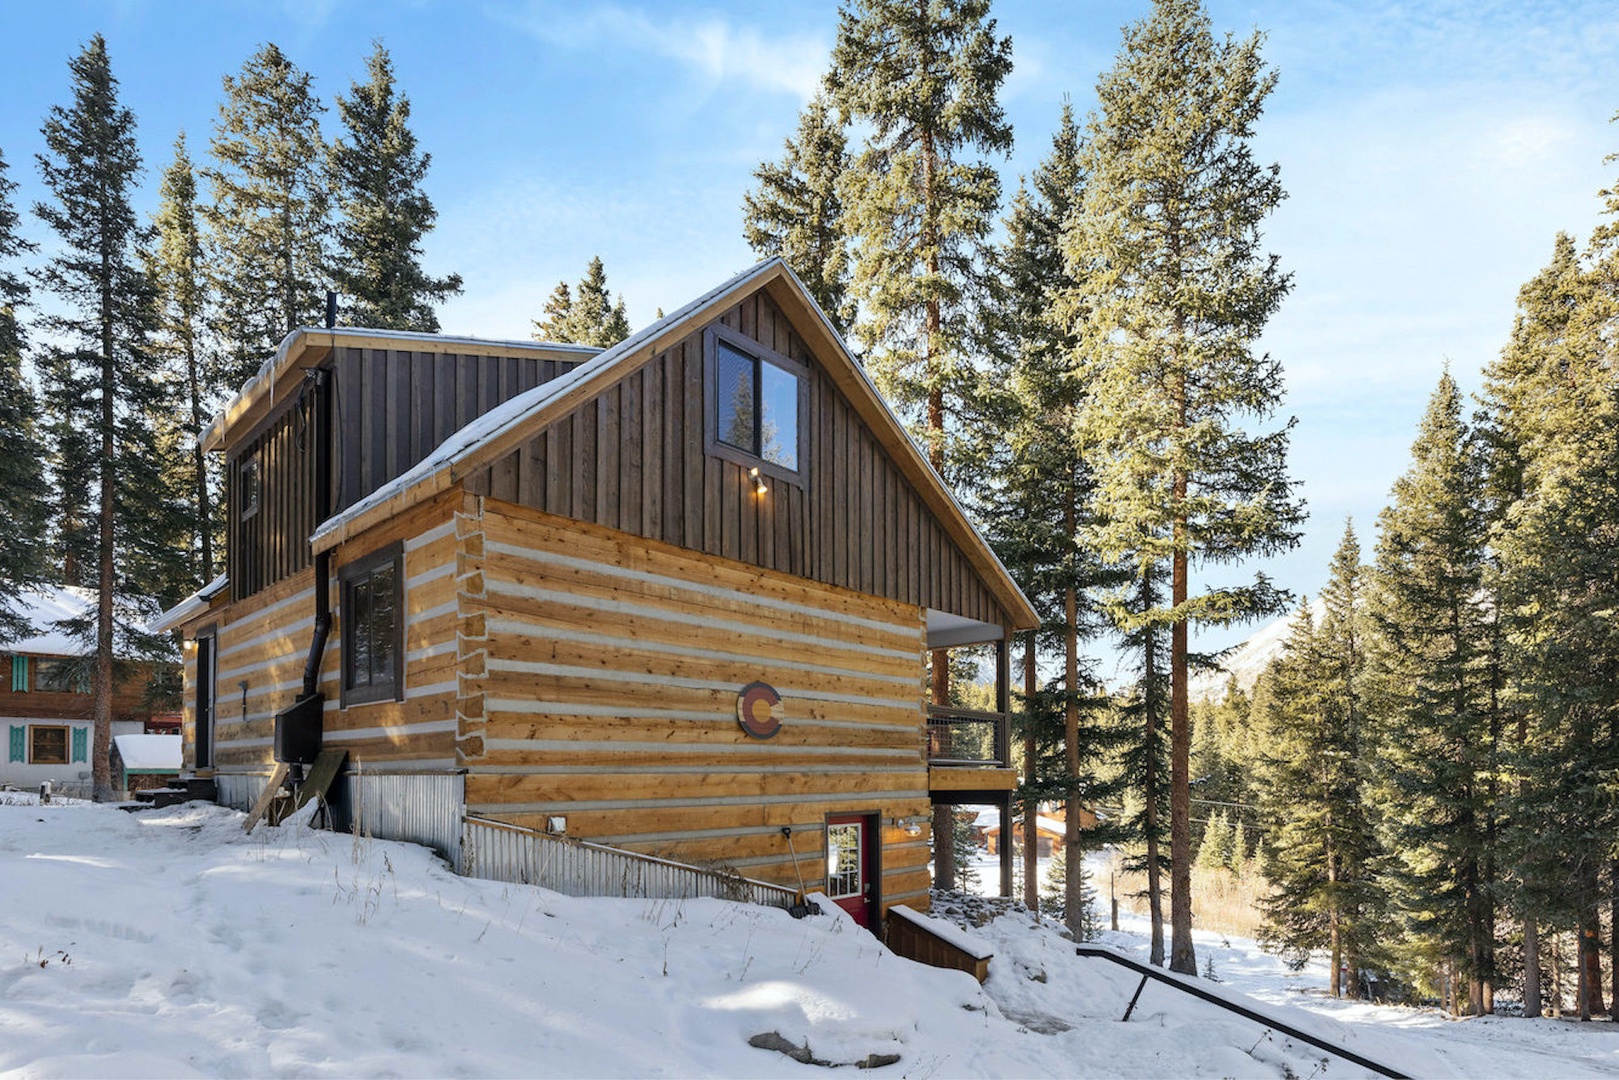 Welcome to Breckenridge Timber Lodge!